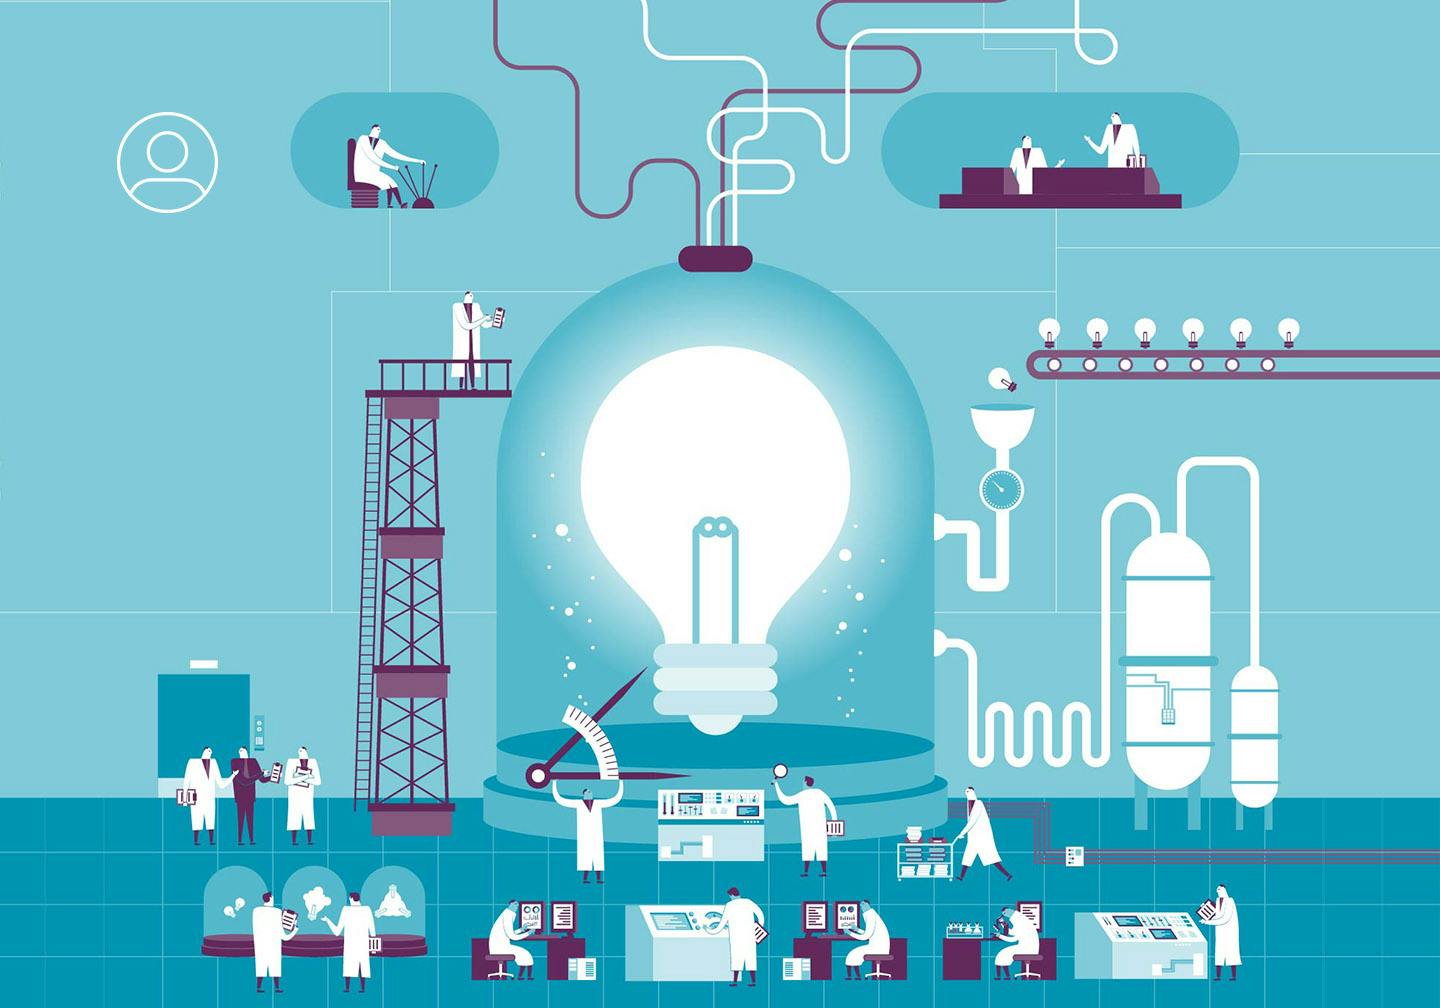 Cartoon image of lightbulb with people in a lab